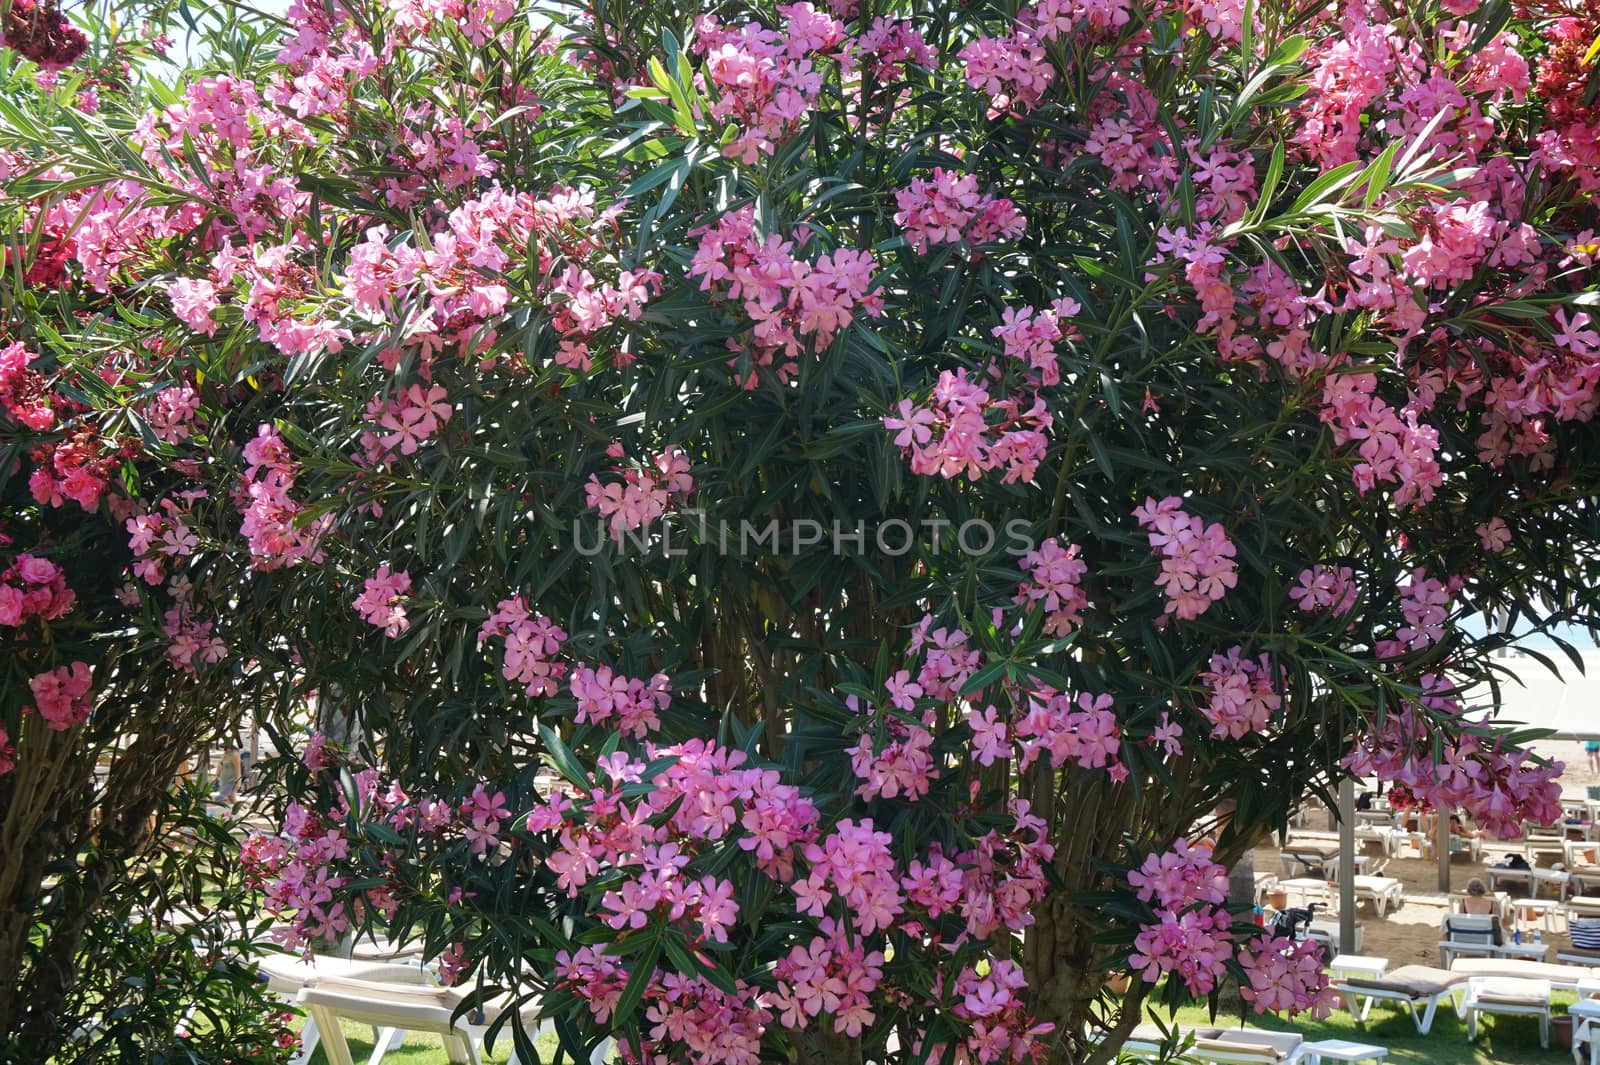 oleander shrub with pink flowers, beautiful floral background by claire_lucia